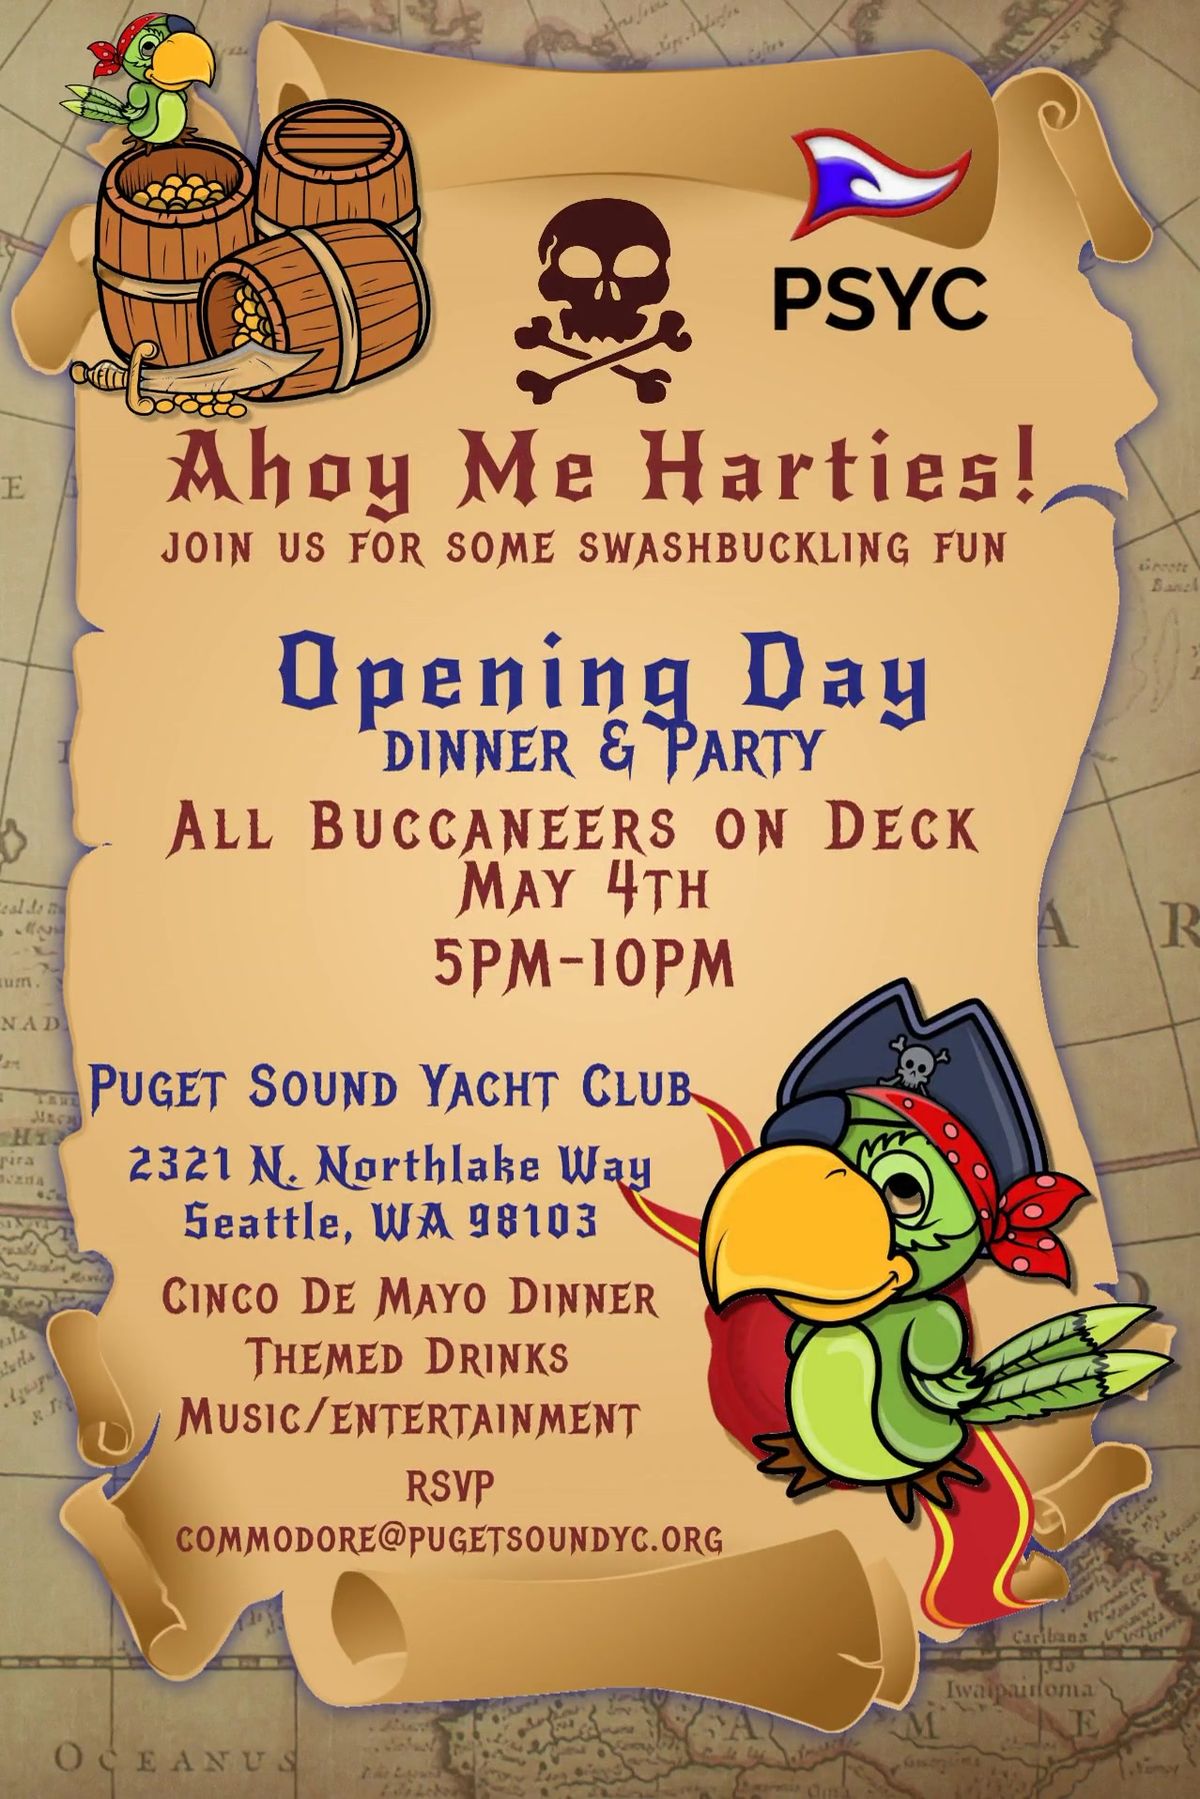 Opening Day of Boating (Members & Invited Guests Only)